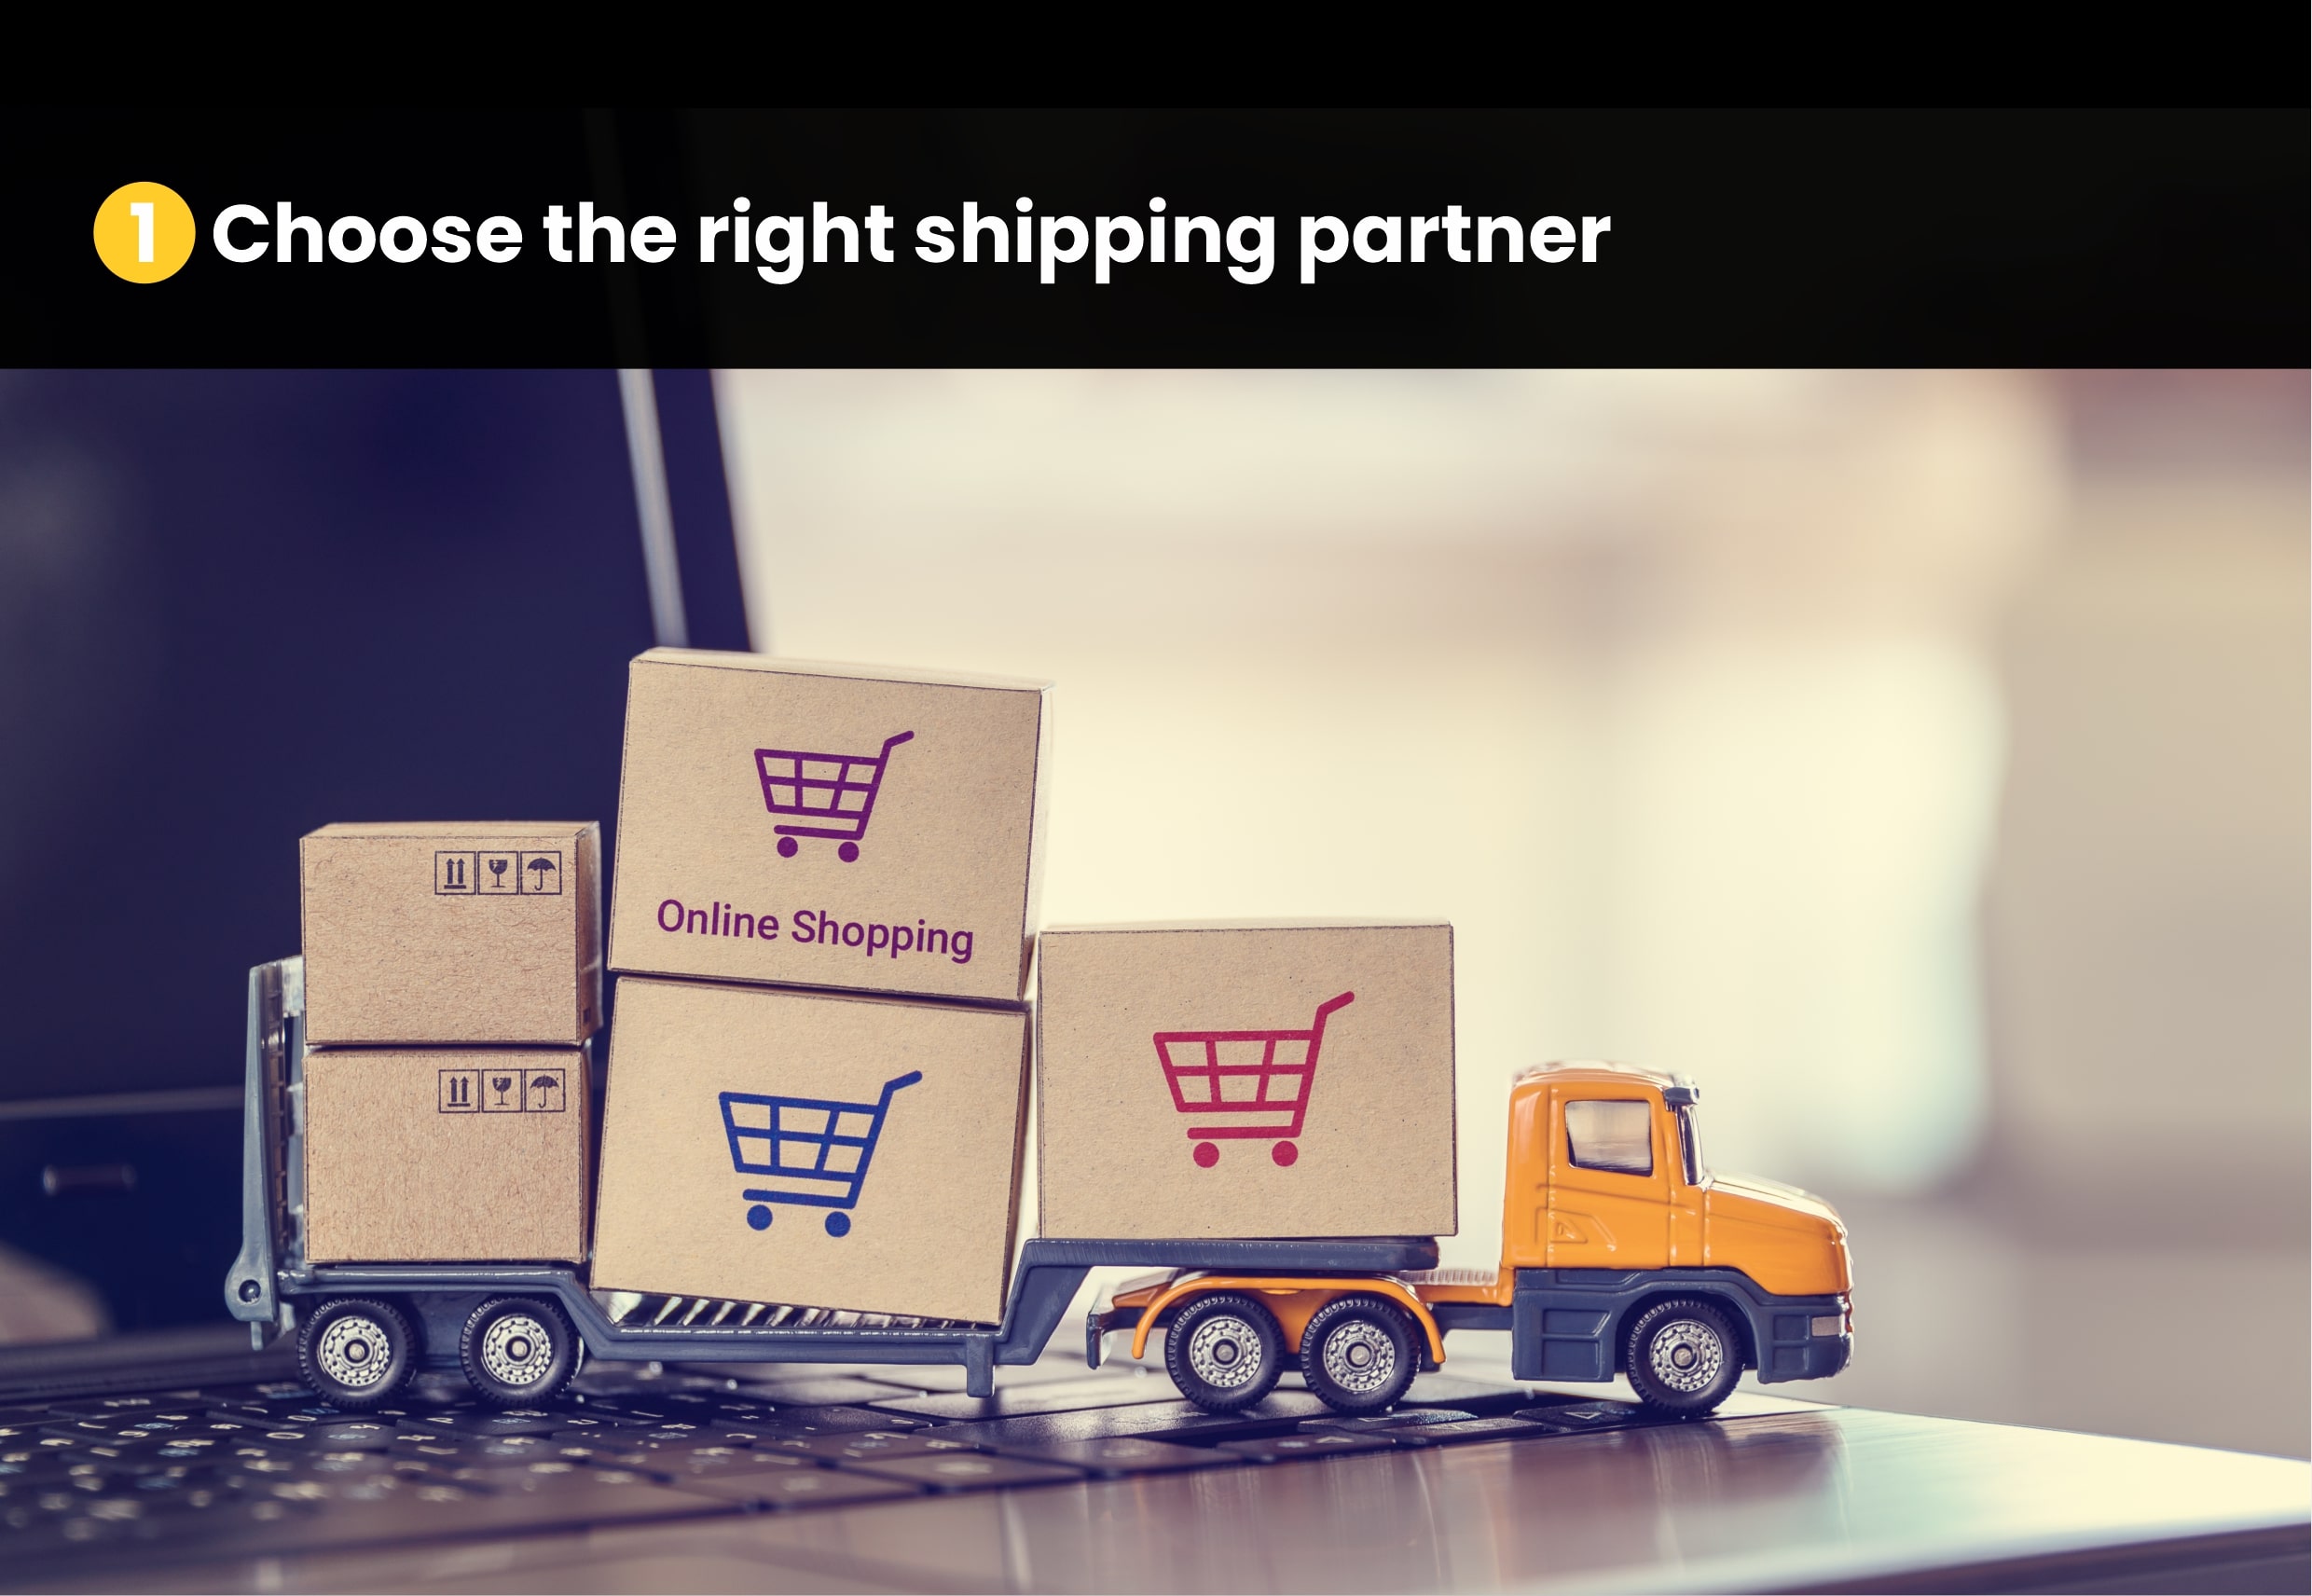 Choose GIG Logistics as the right shipping partner